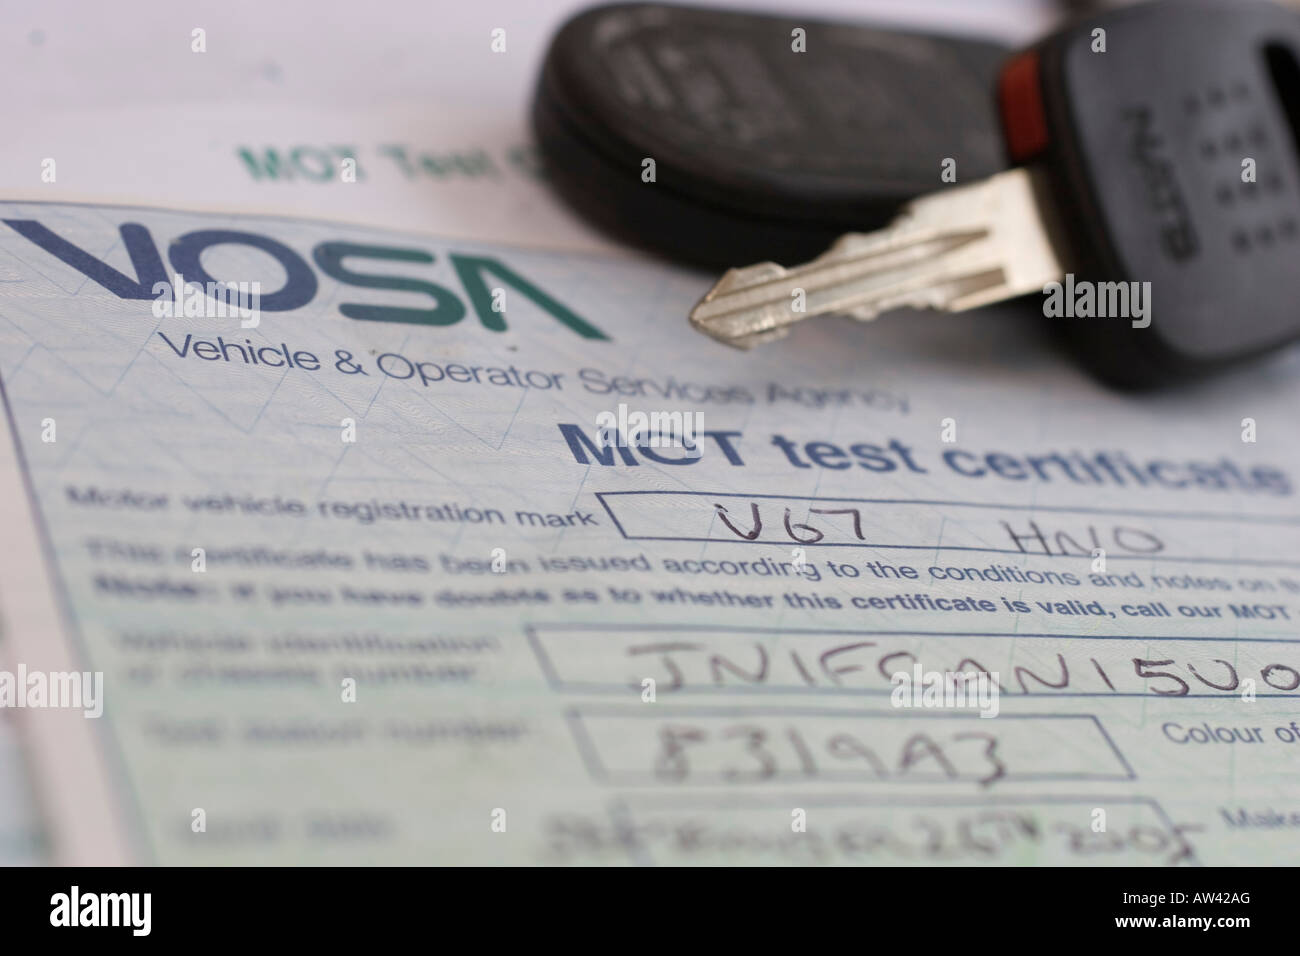 vosa mot test certificate with car keys vehicle operator services agency Stock Photo